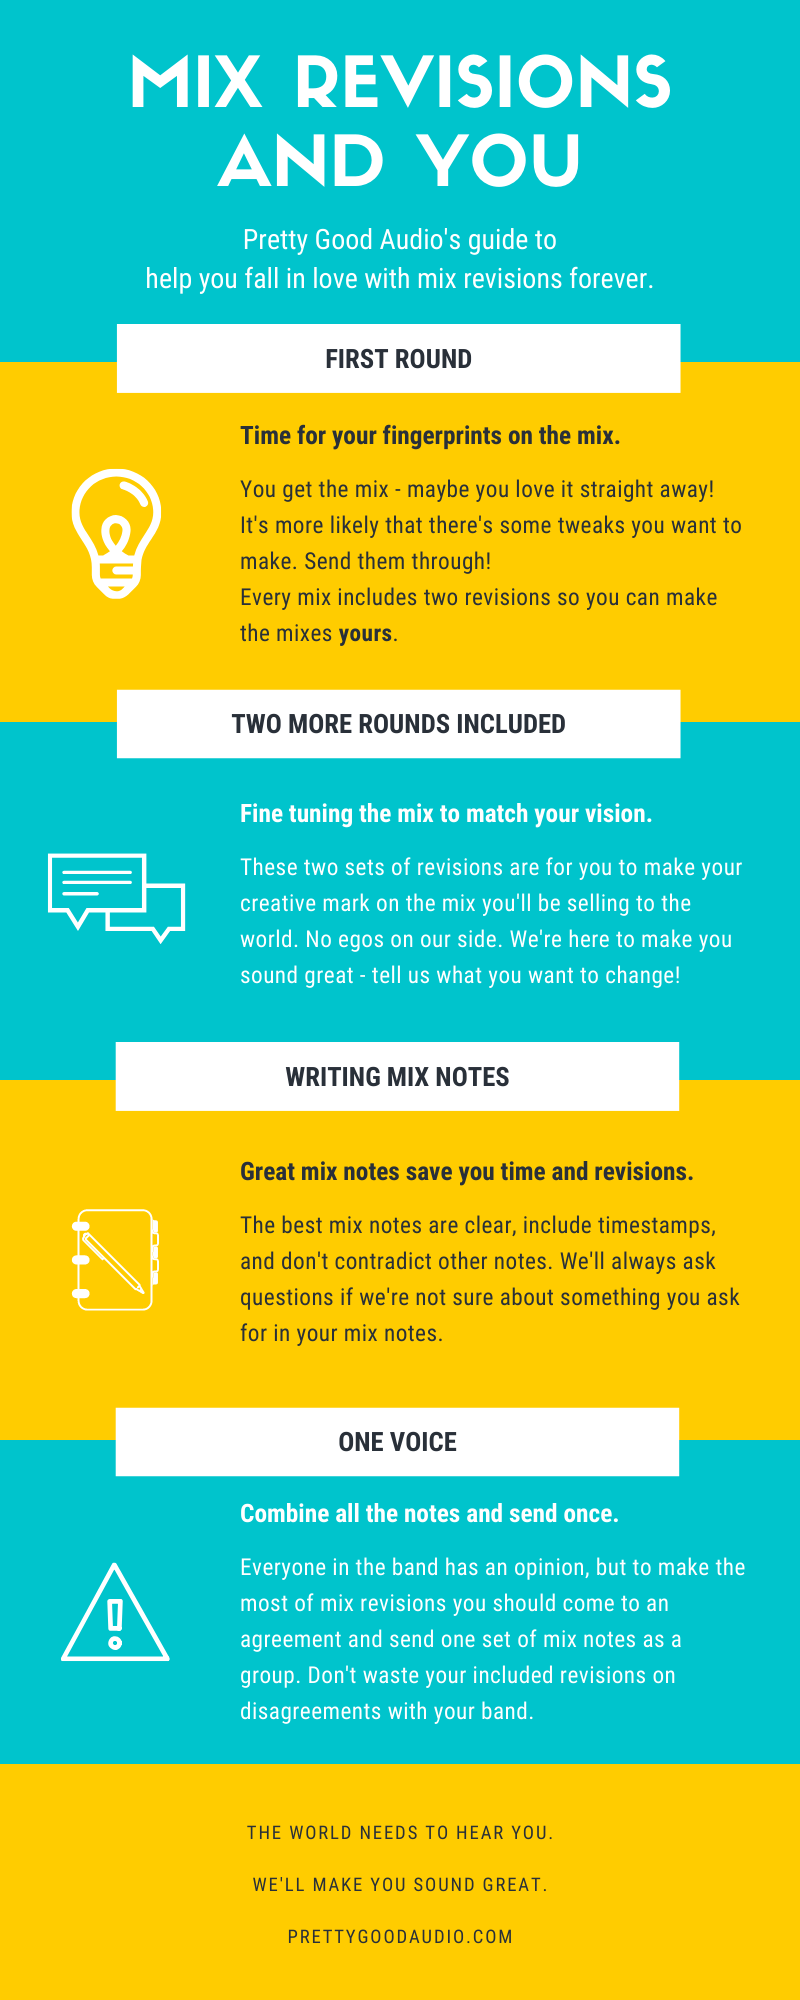 An infographic summarizing tips for mix revisions